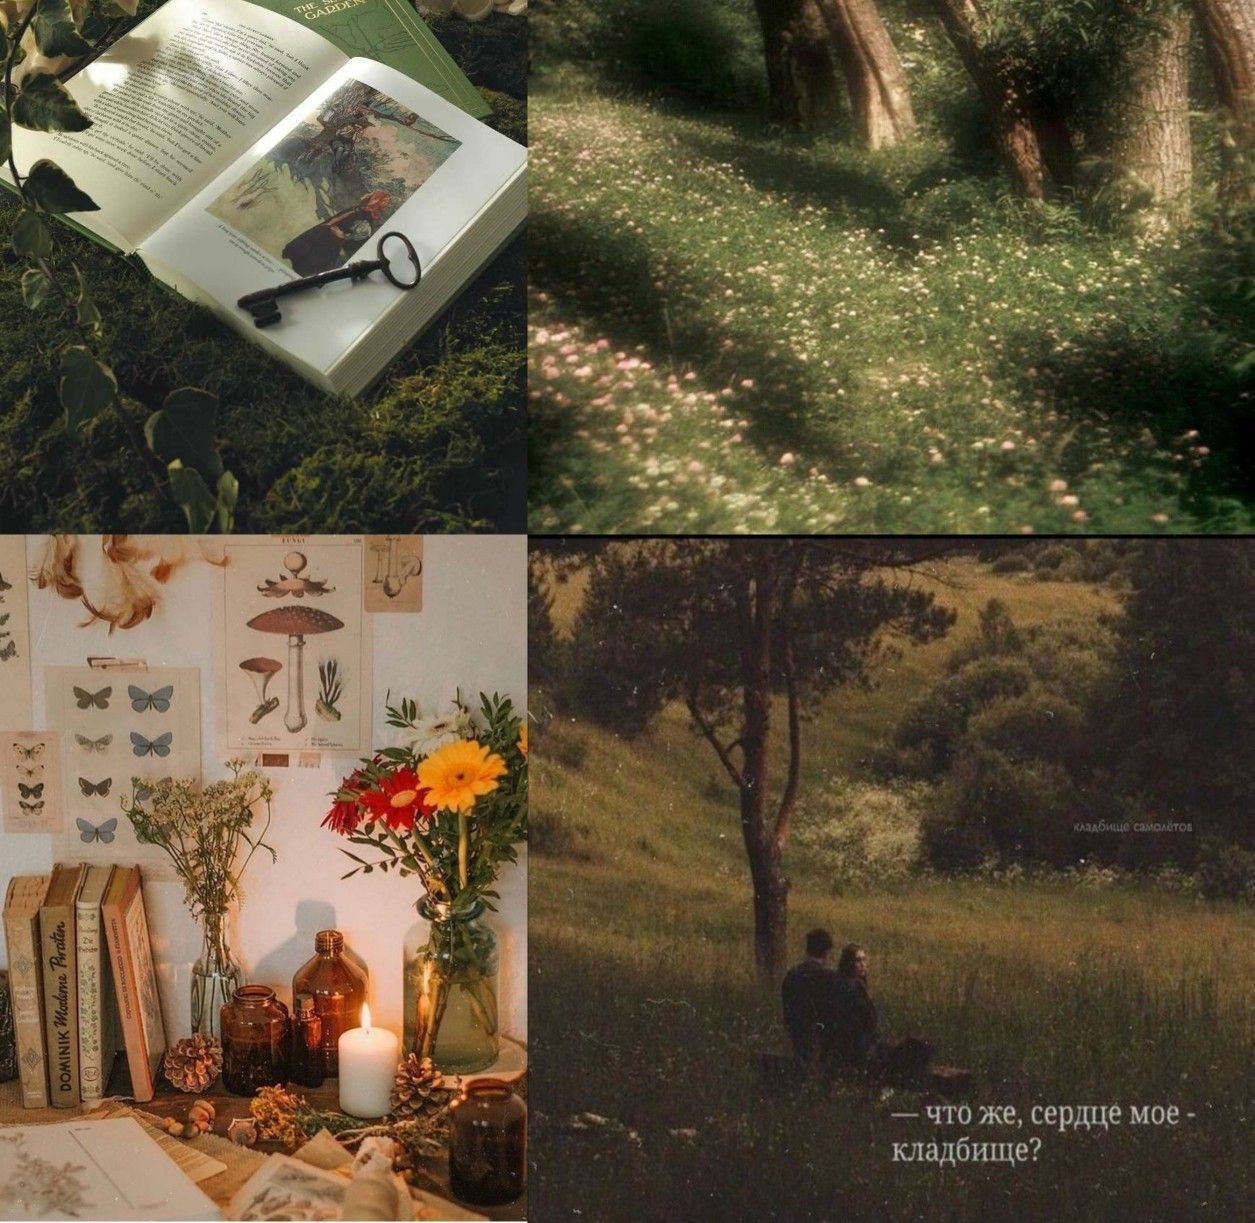 Aesthetic pictures of books, flowers, and a forest. - Goblincore